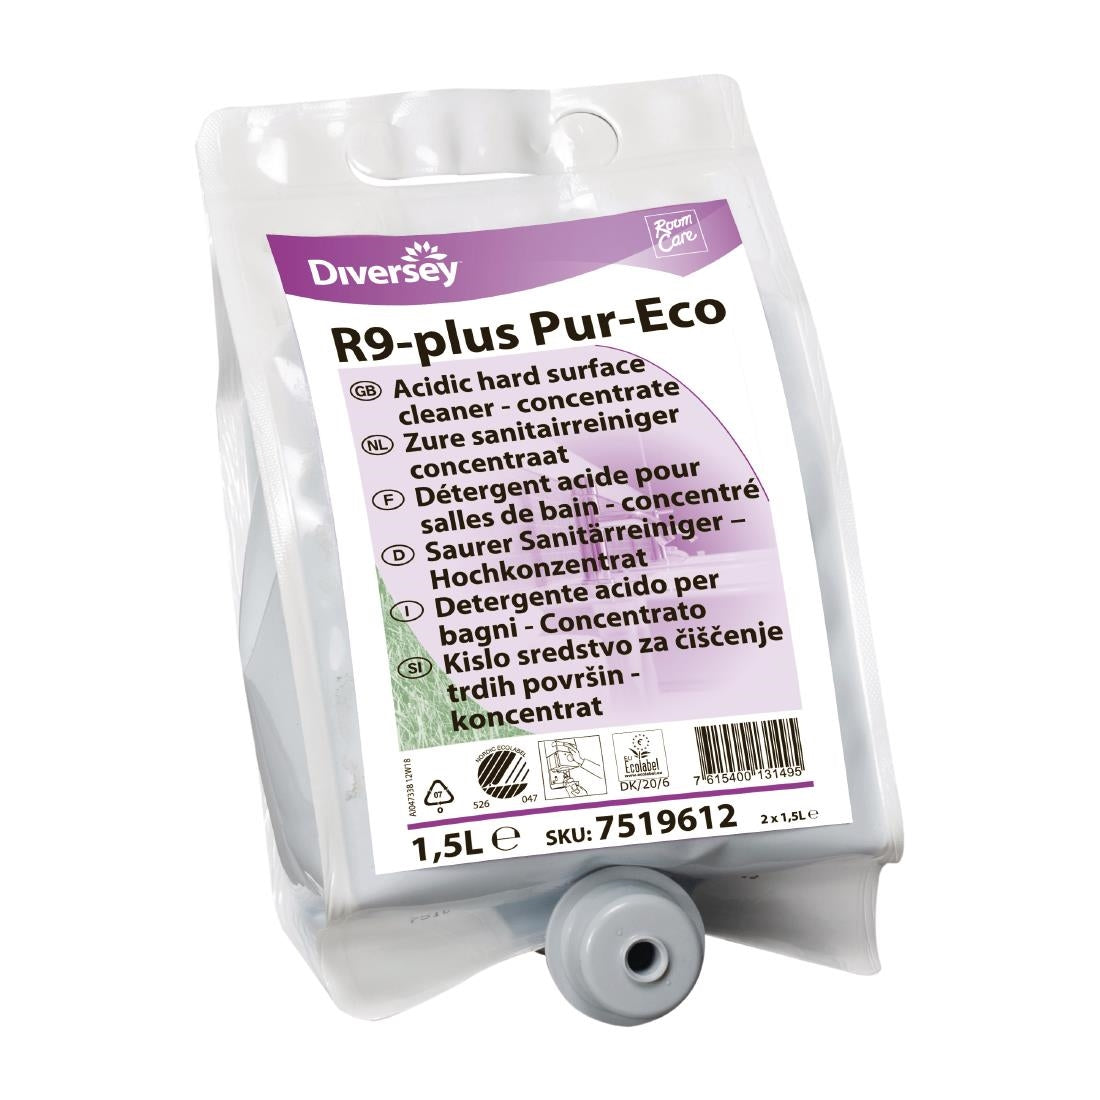 CX814 Room Care R9-plus Pur-Eco Bathroom Cleaner Concentrate 1.5Ltr JD Catering Equipment Solutions Ltd